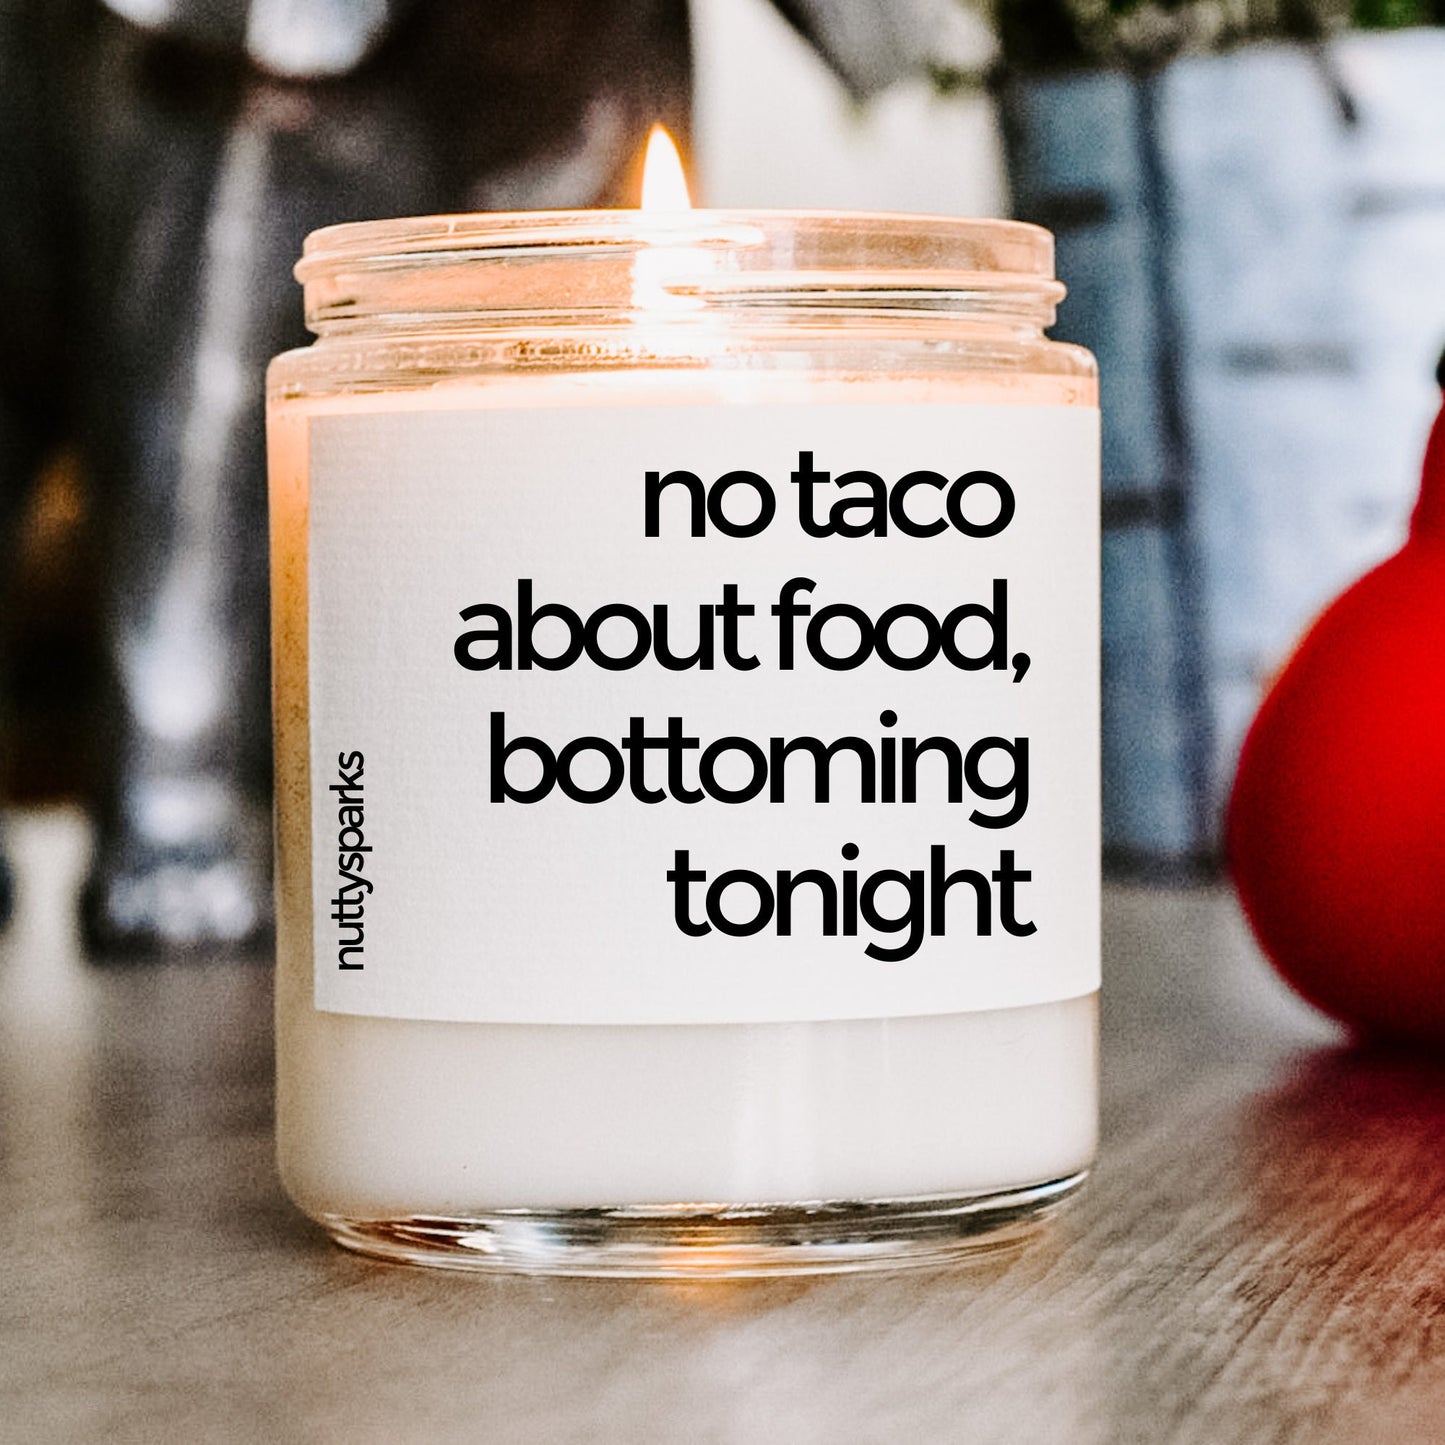 no taco about food, bottoming tonight